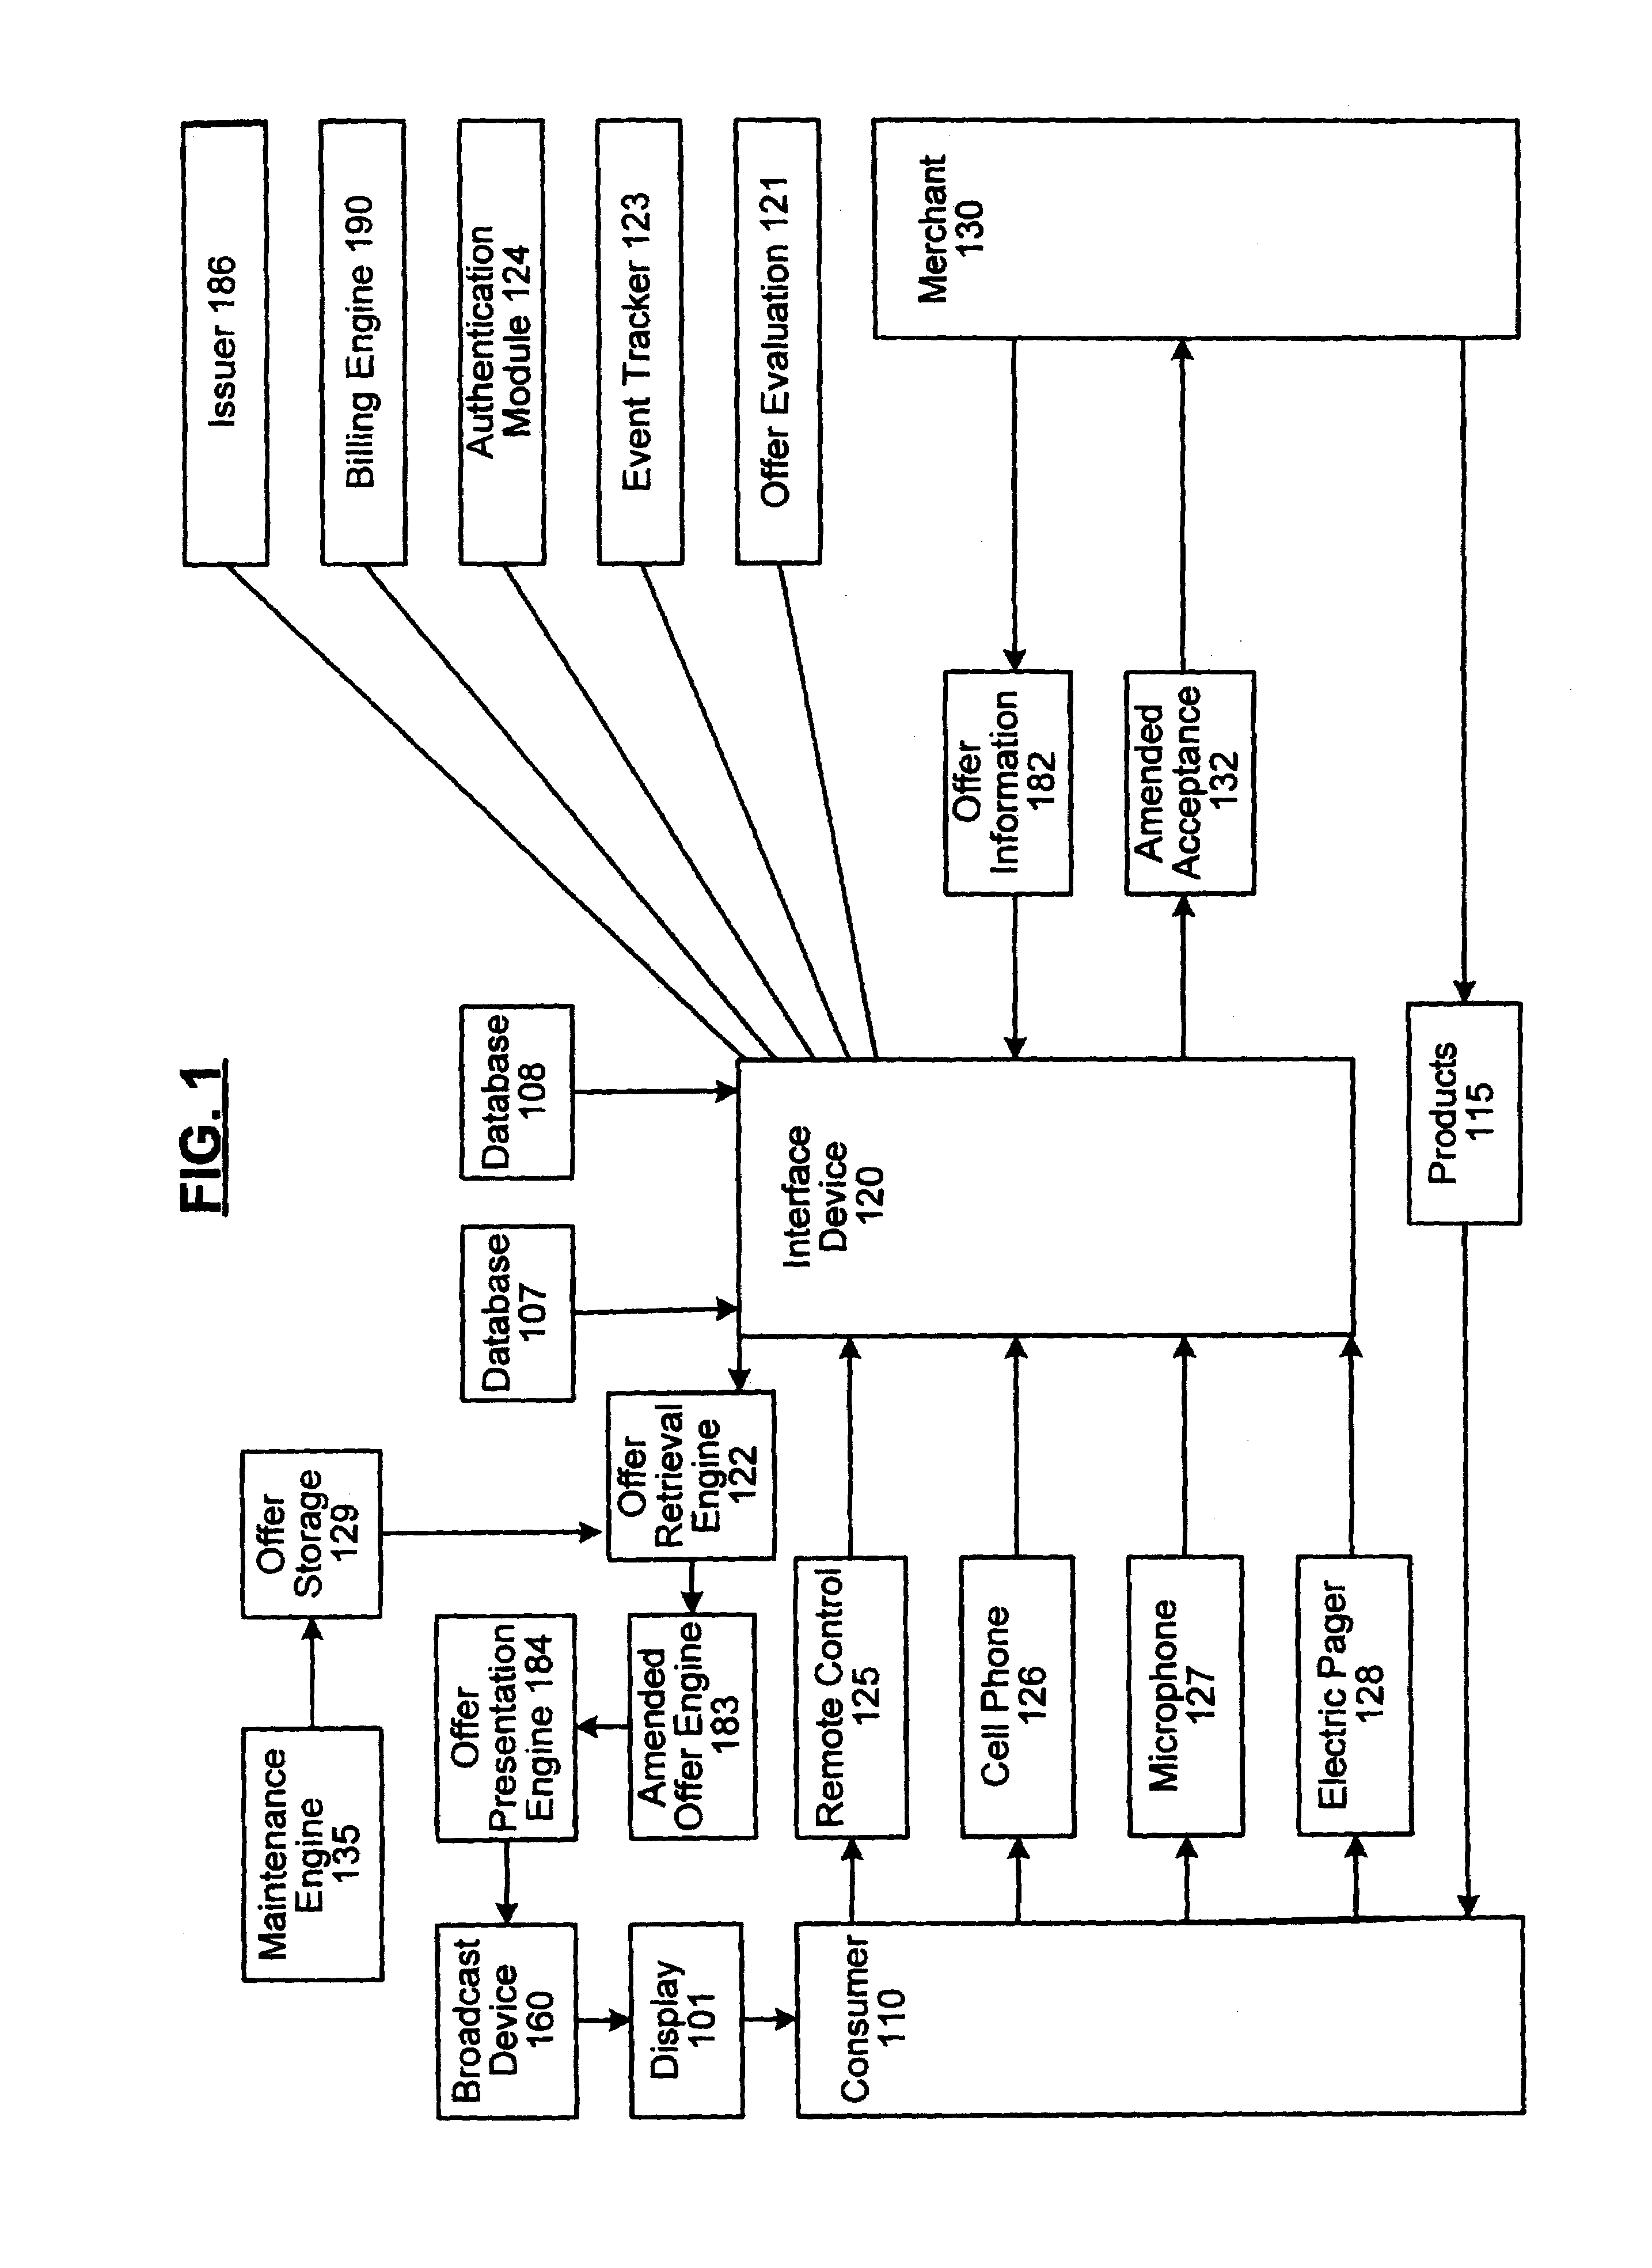 System and method for facilitating interaction between consumer and merchant